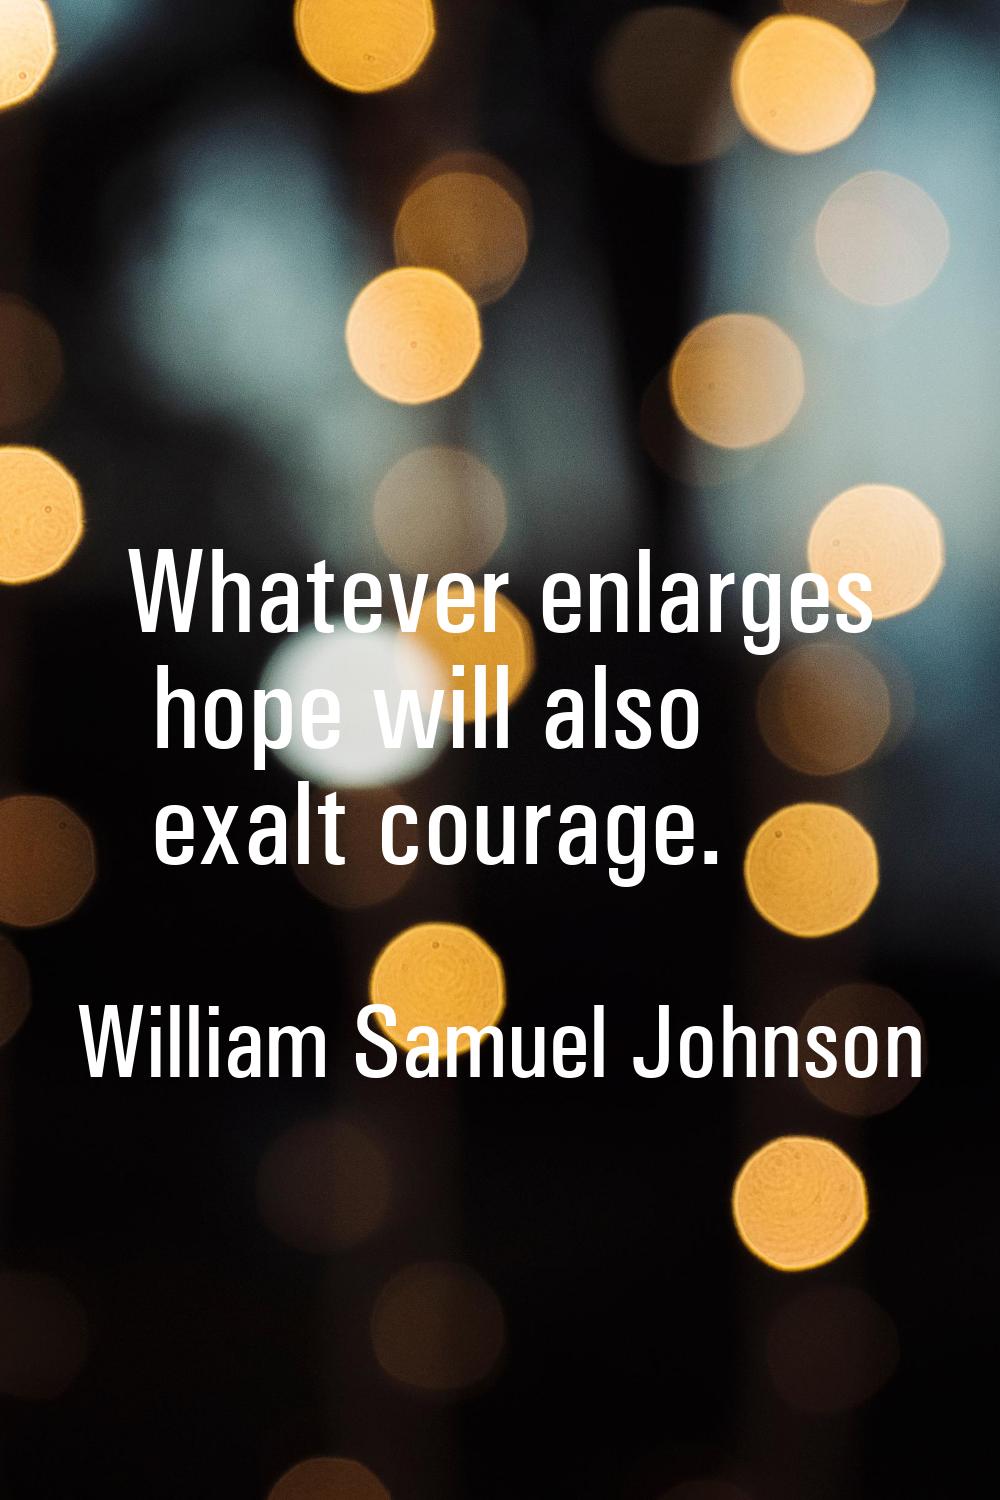 Whatever enlarges hope will also exalt courage.